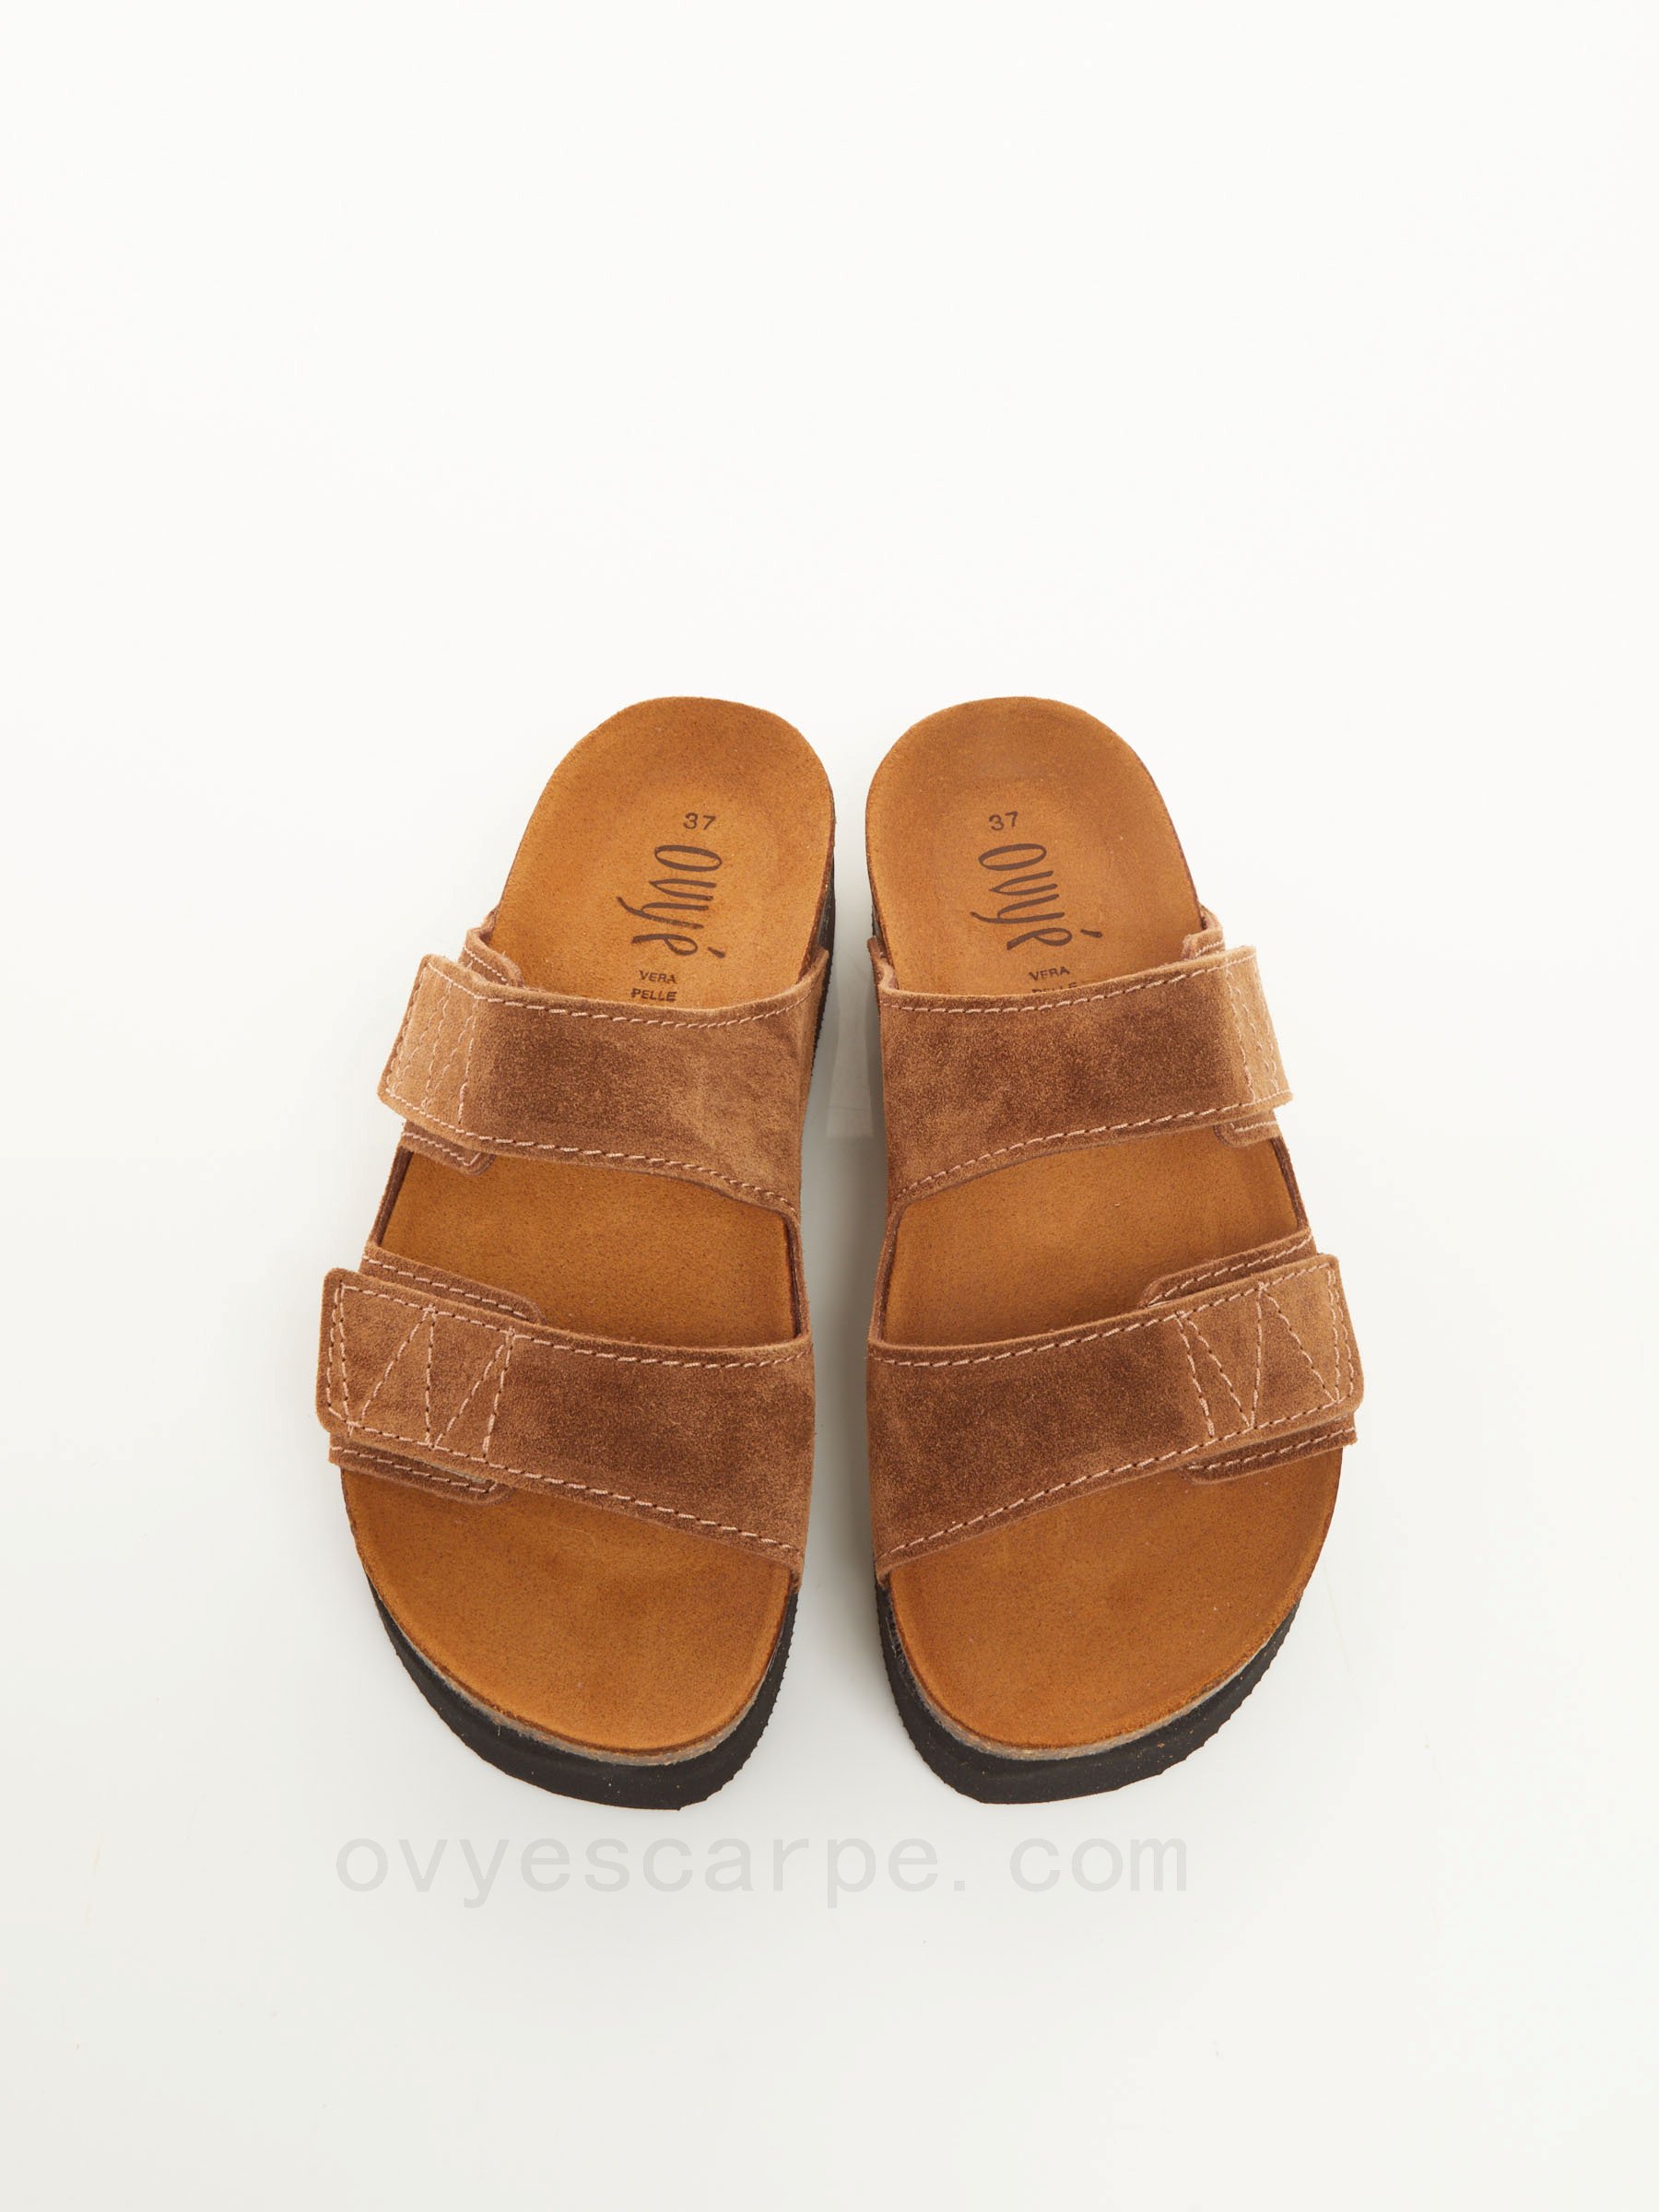 Suede Sleepers F08161027-0701 Outlet